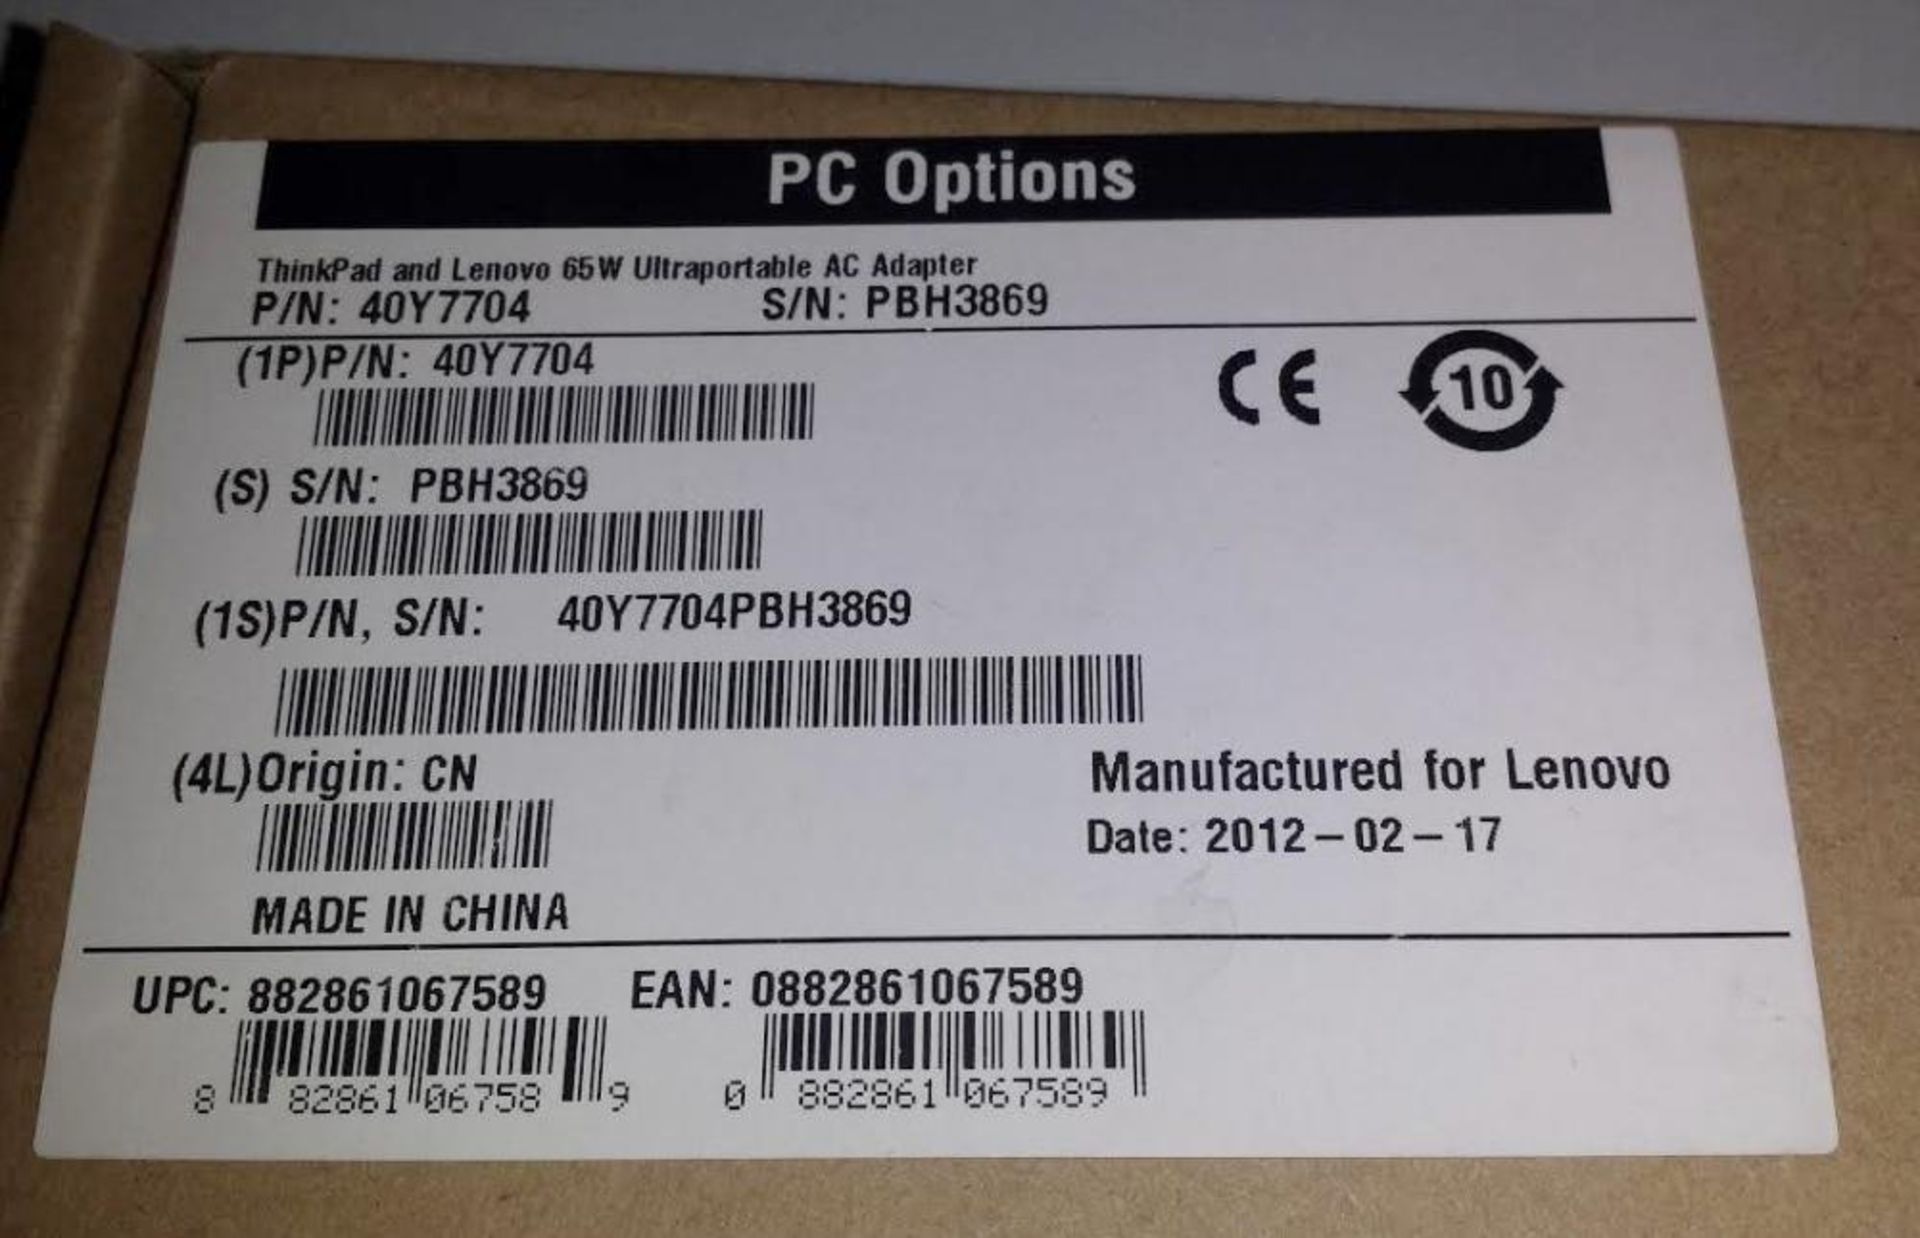 1 x ThinkPad and Lenovo 65W Ultraportable AC Laptop Adapter - New in Box - CL400 - Ref JP1036 - Loca - Image 2 of 3